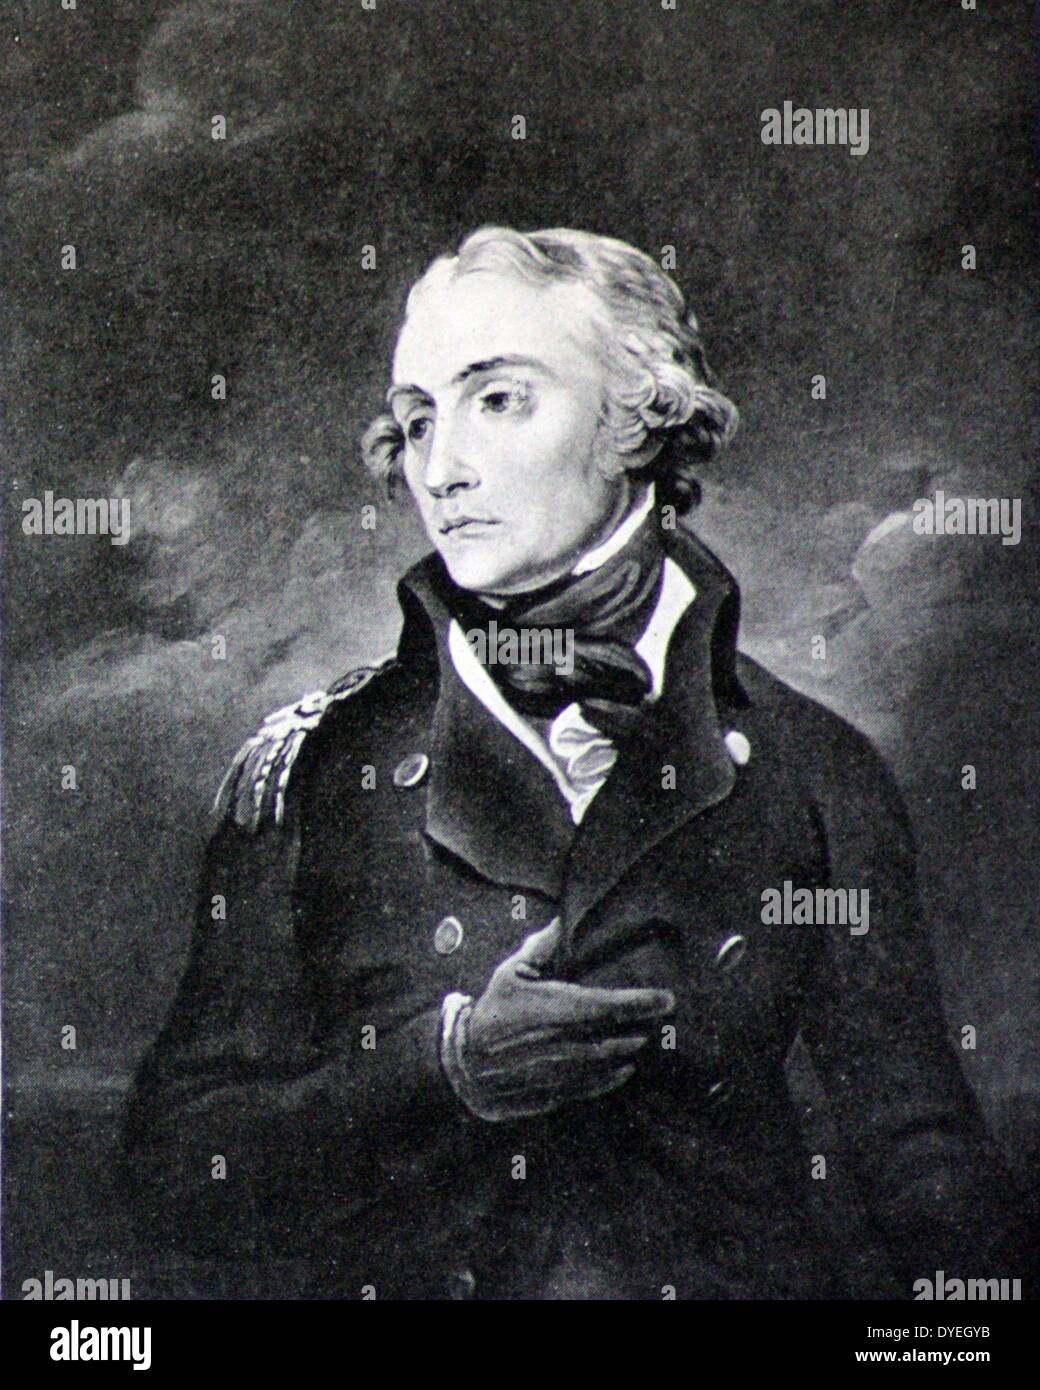 Sir Edward Berry (1768-1831) was an officer in Britain's Royal Navy primarily known for his role as flag captain of Read Admiral Horatio Nelson's ship HMS Vanguard at the Battle of the Nile, prior to his knighthood in 1798. Stock Photo